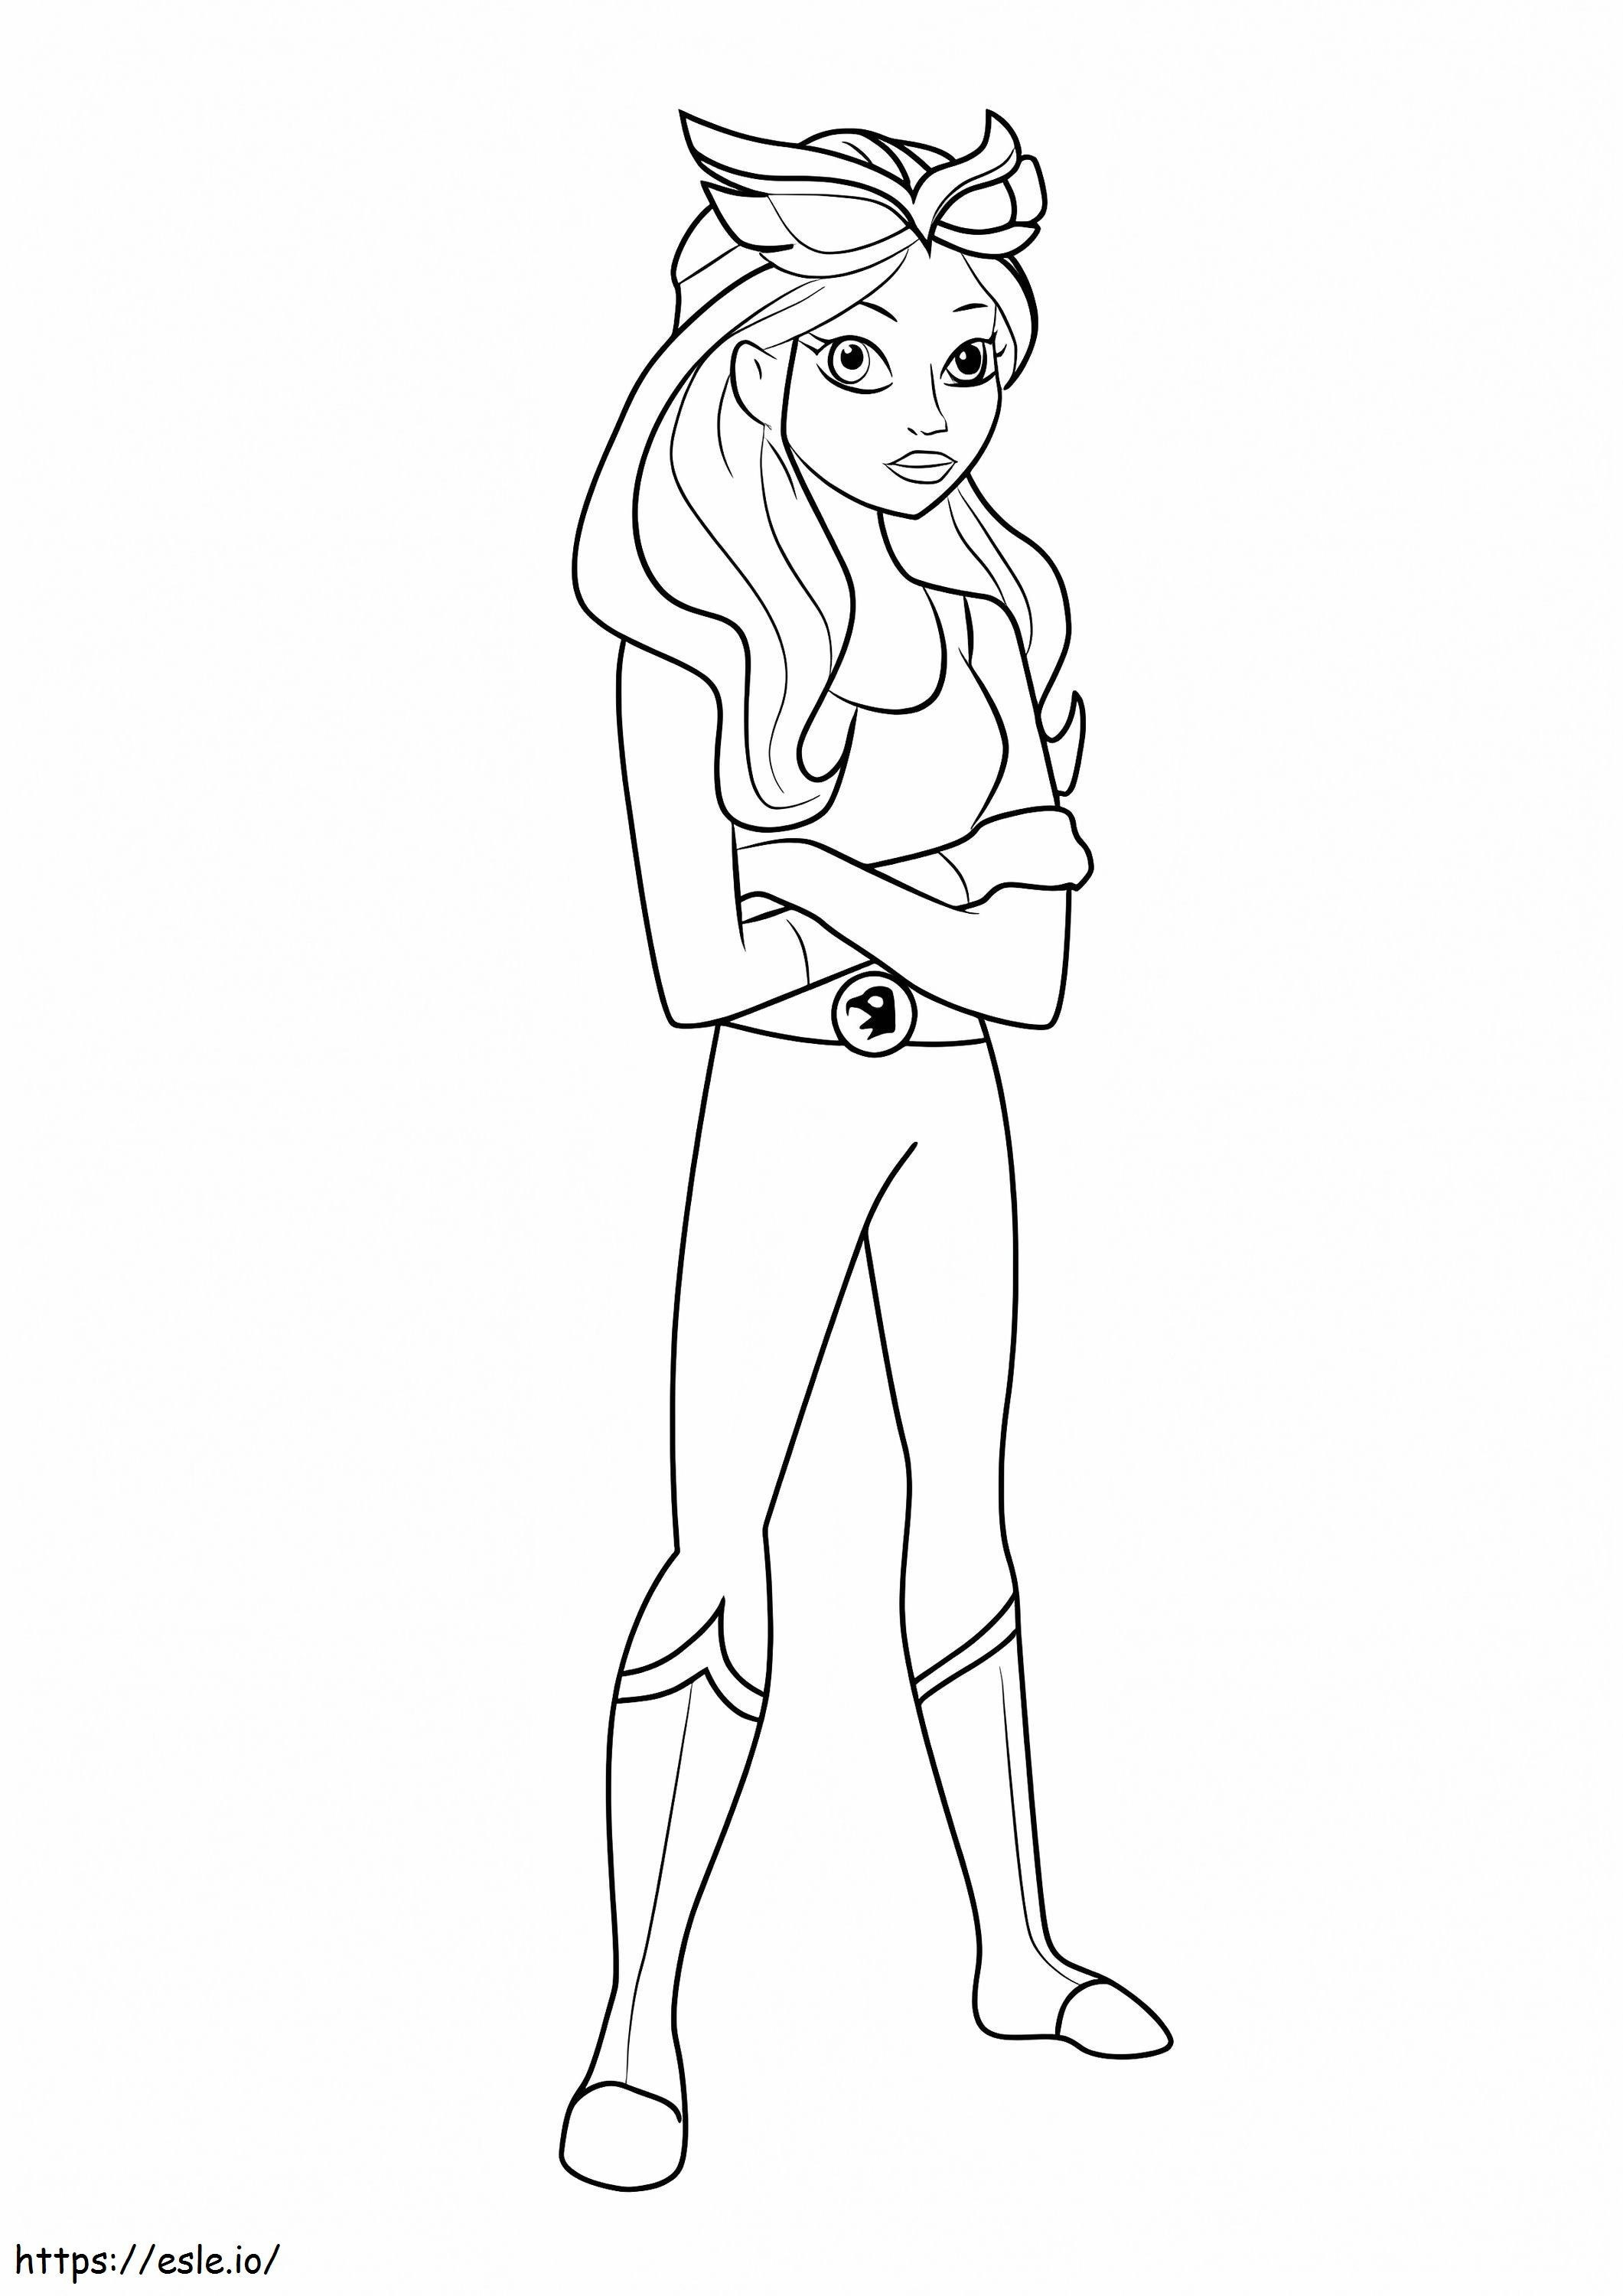 Hawkgirl From DC Super Hero Girls coloring page